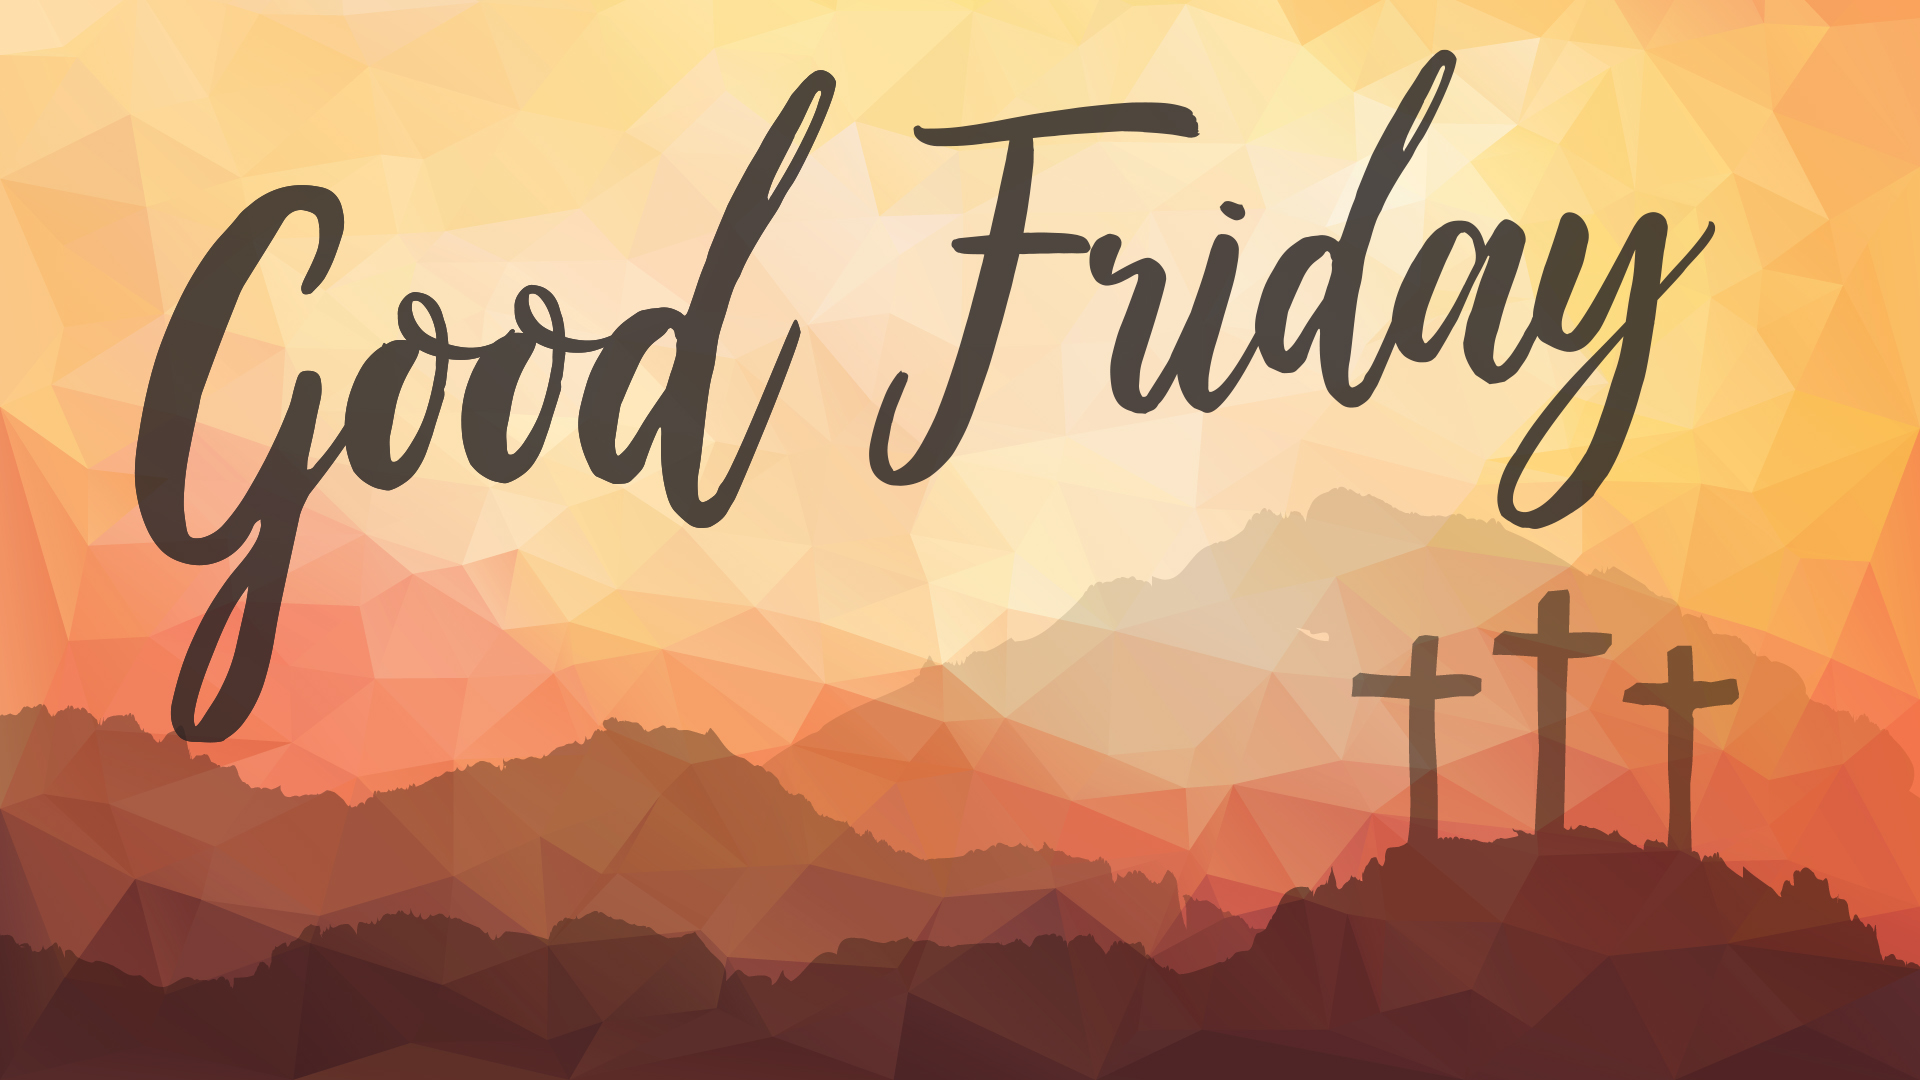 Good Friday Pictures HD Wallpapers 2019 - Good Friday New Wallpapers HD